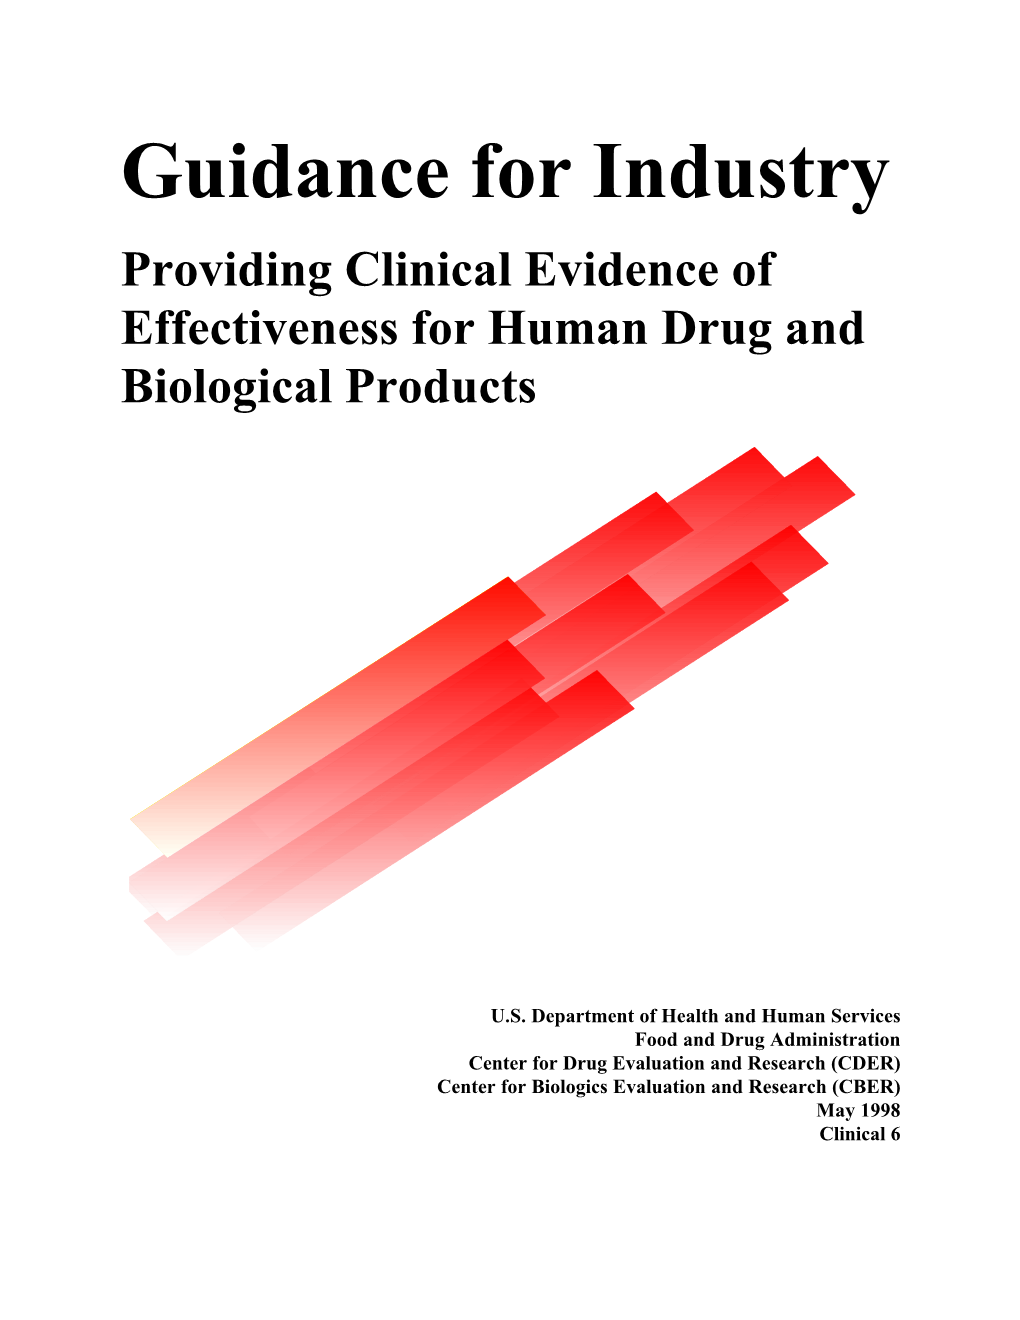 Providing Clinical Evidence of Effectiveness for Human And